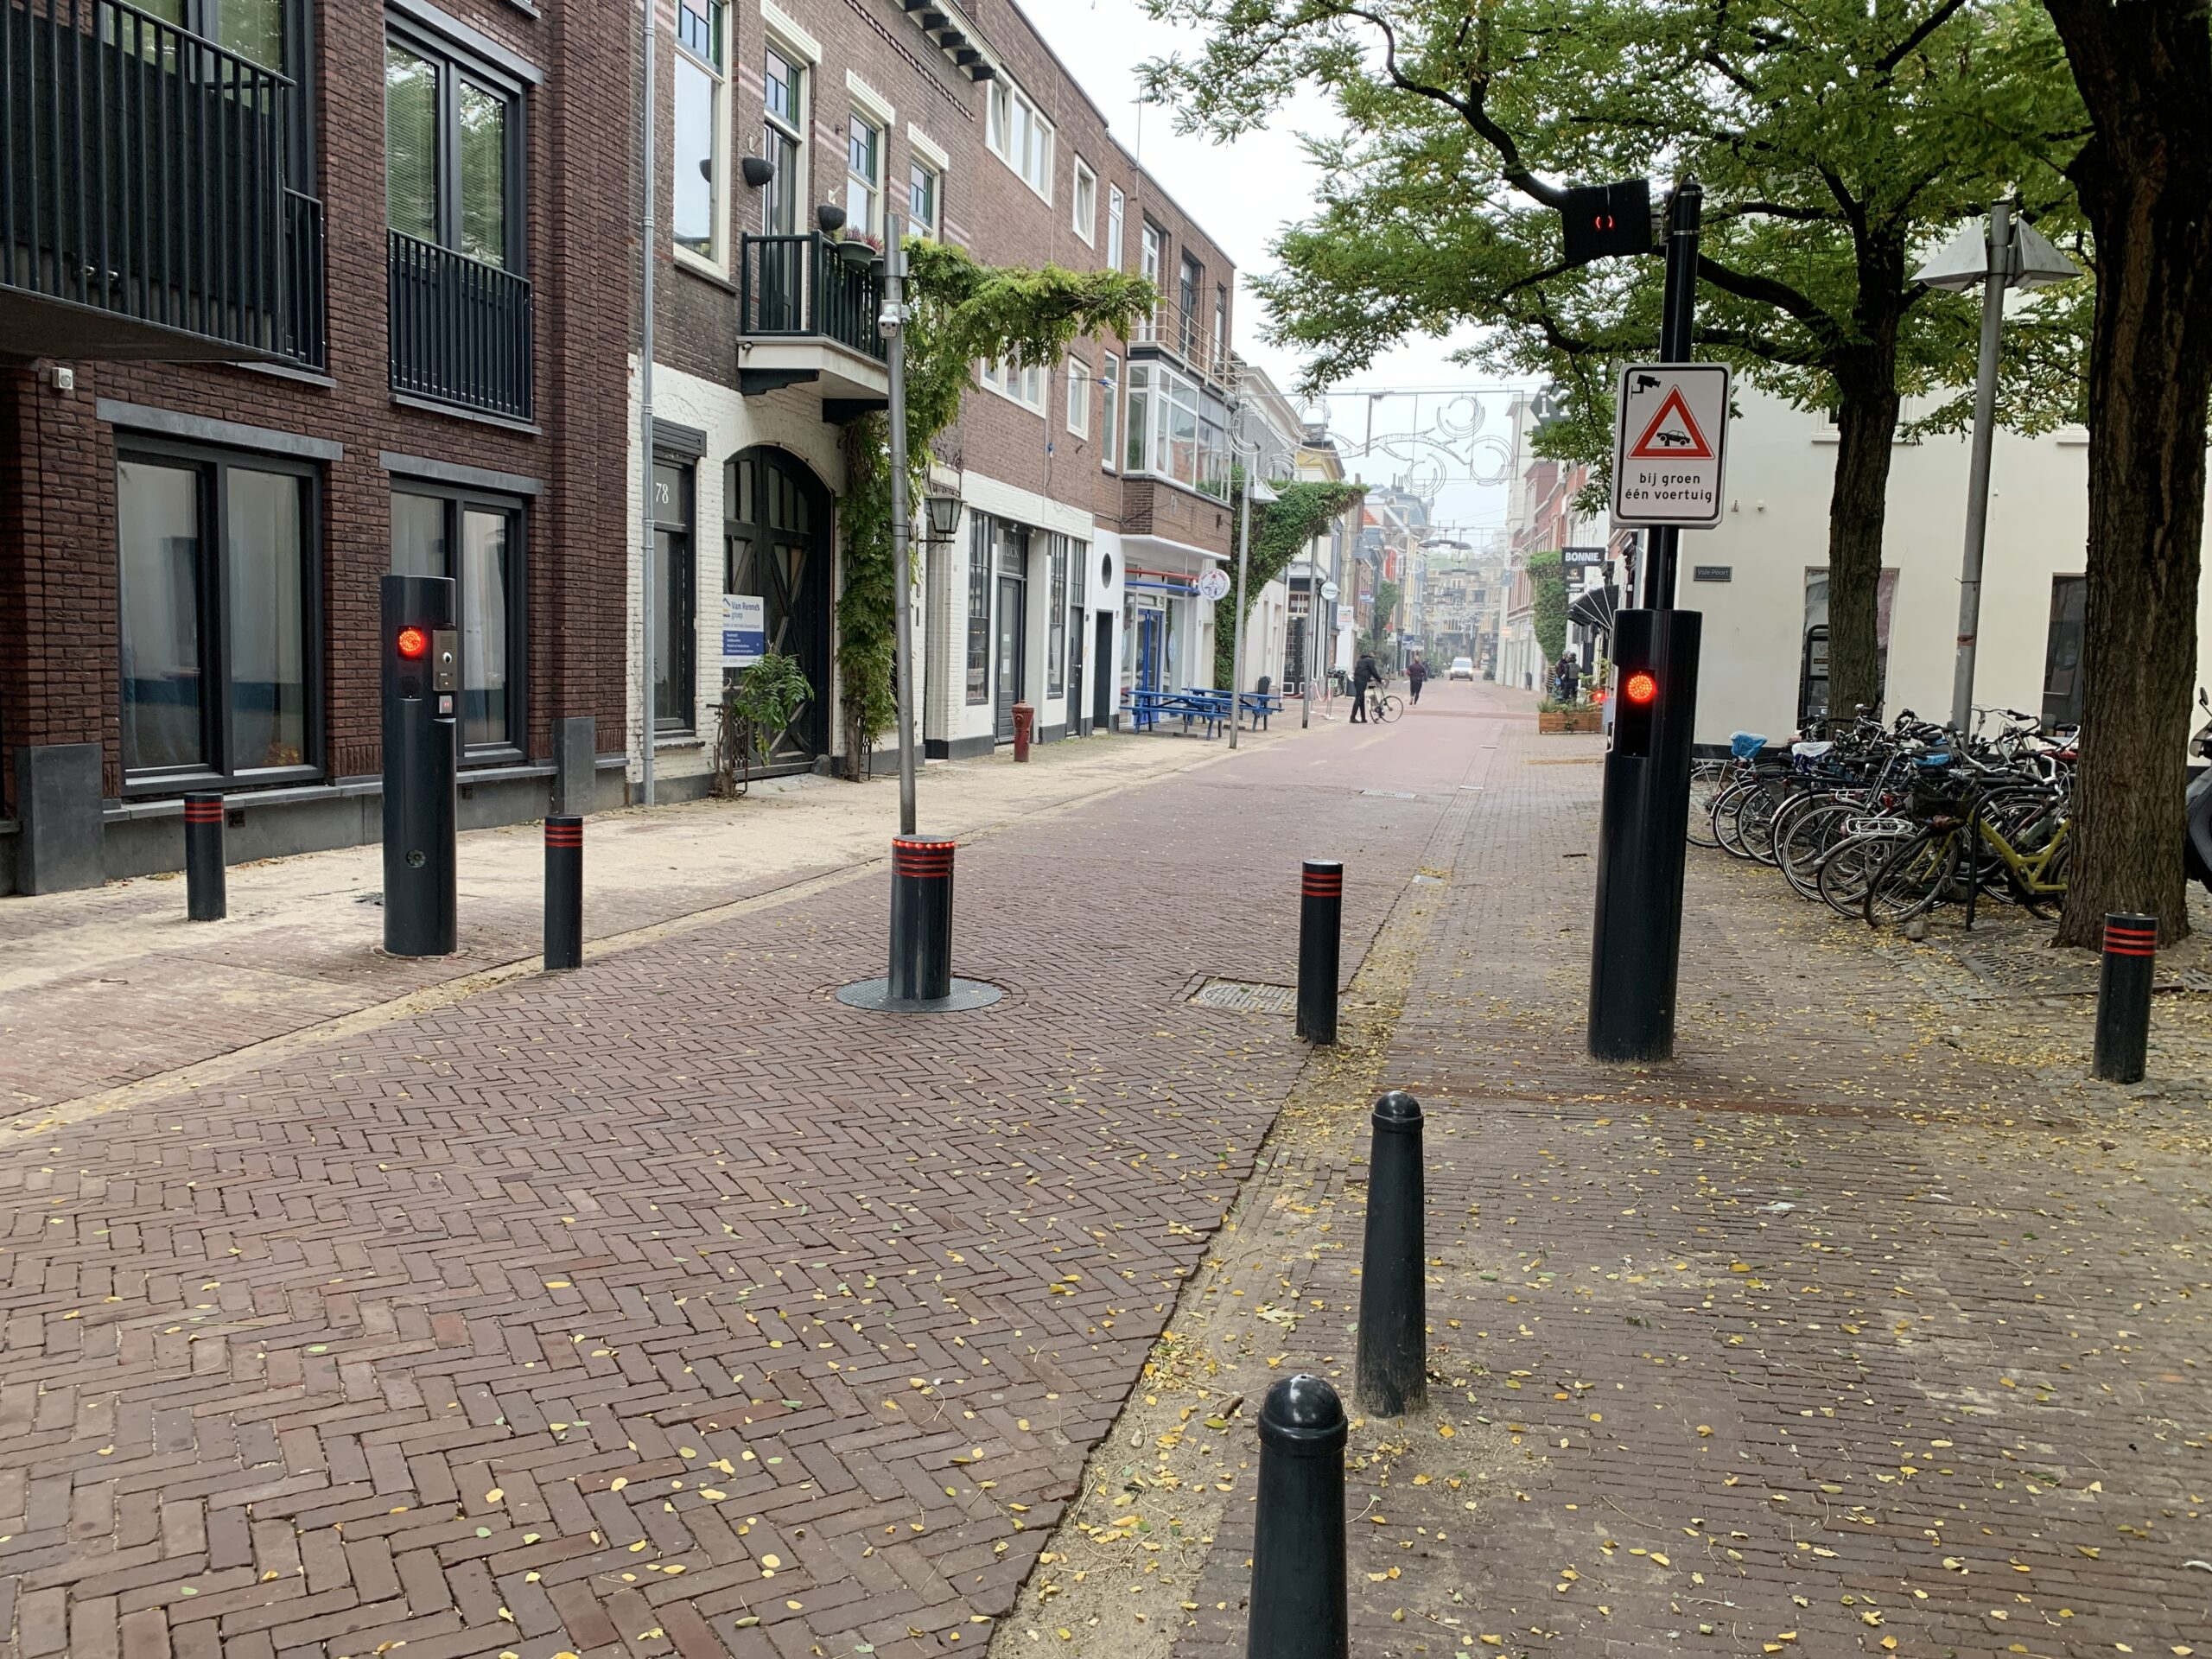 The city of Arnhem has chosen Nedap to regulate vehicle flows and to provide a seamless vehicle access experience in its city center